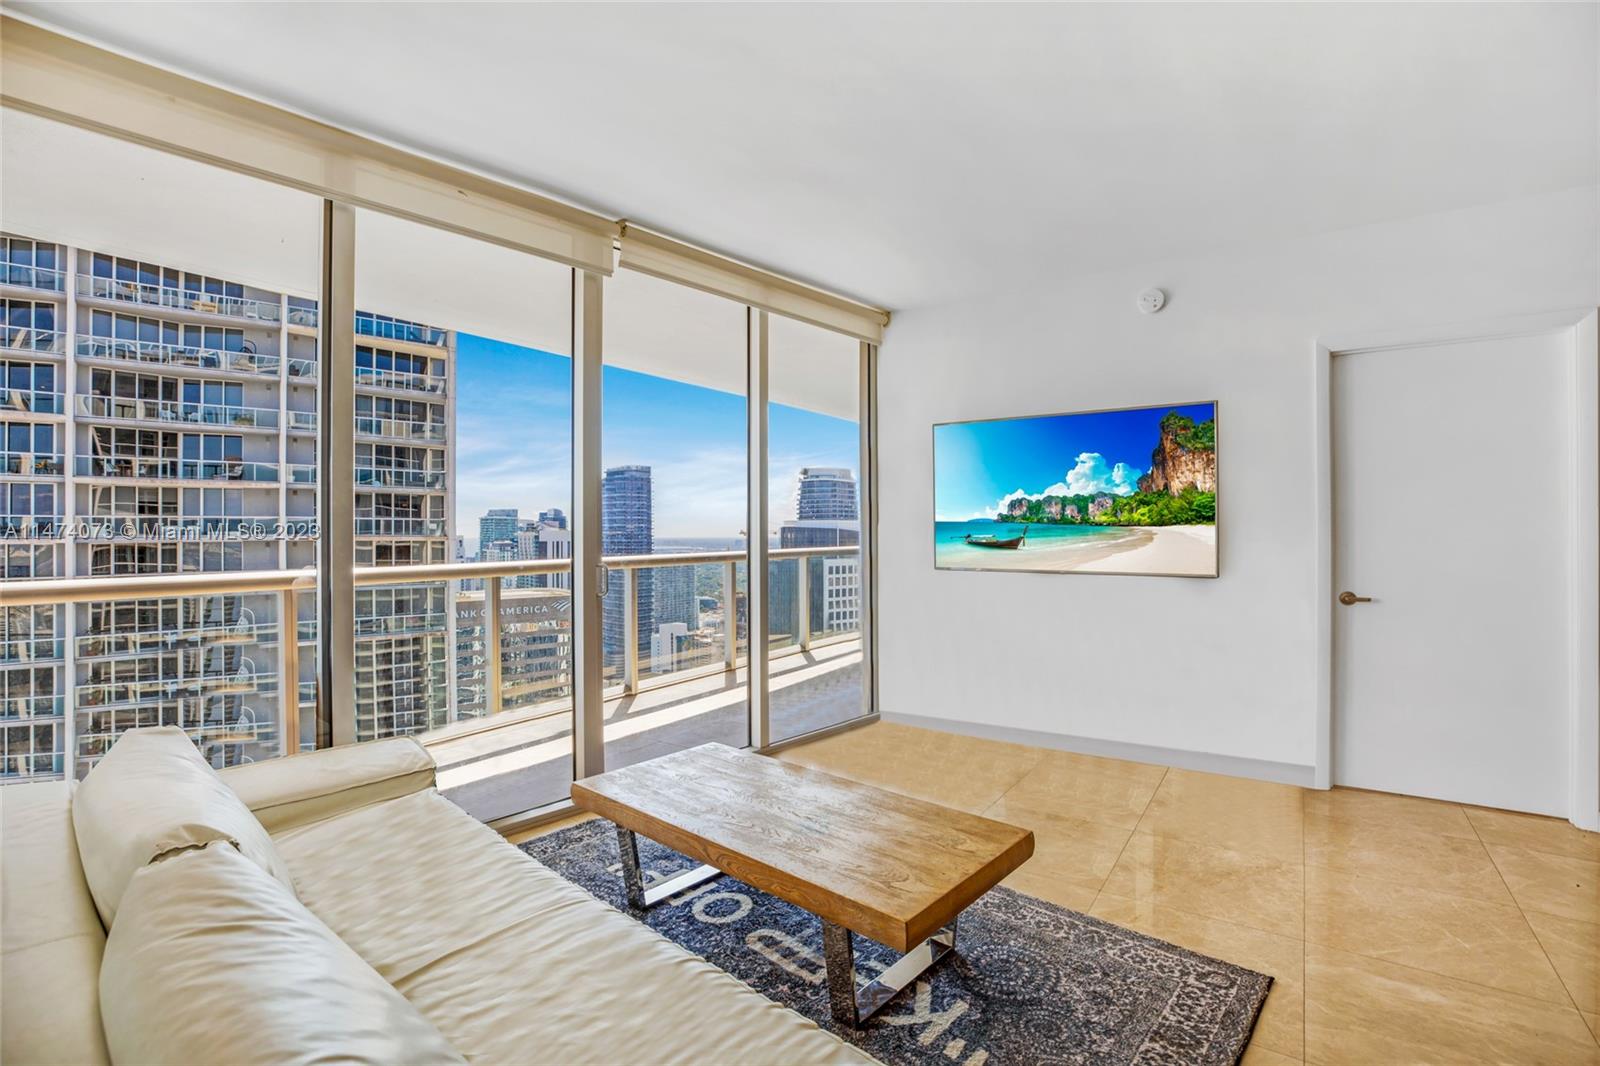 Just listed! Check out this beautiful 2 bedroom + den 2 bathroom condo at ICON BRICKELL! breathtaking water and city view, this unit is perfect for anyone looking for space and Miami life style. 
Located in the heart of Miami, this condo offers the best amenities in town! You'll have access to the world-famous pool deck, a 5-star spa, a state-of-the-art gym, and not one, but two of the top restaurants in the city.
Walking distance from Brickell City Center, you'll have shopping, dining, and entertainment options right at your doorstep.
Don't miss out on this amazing opportunity to own a piece of luxury in Miami!